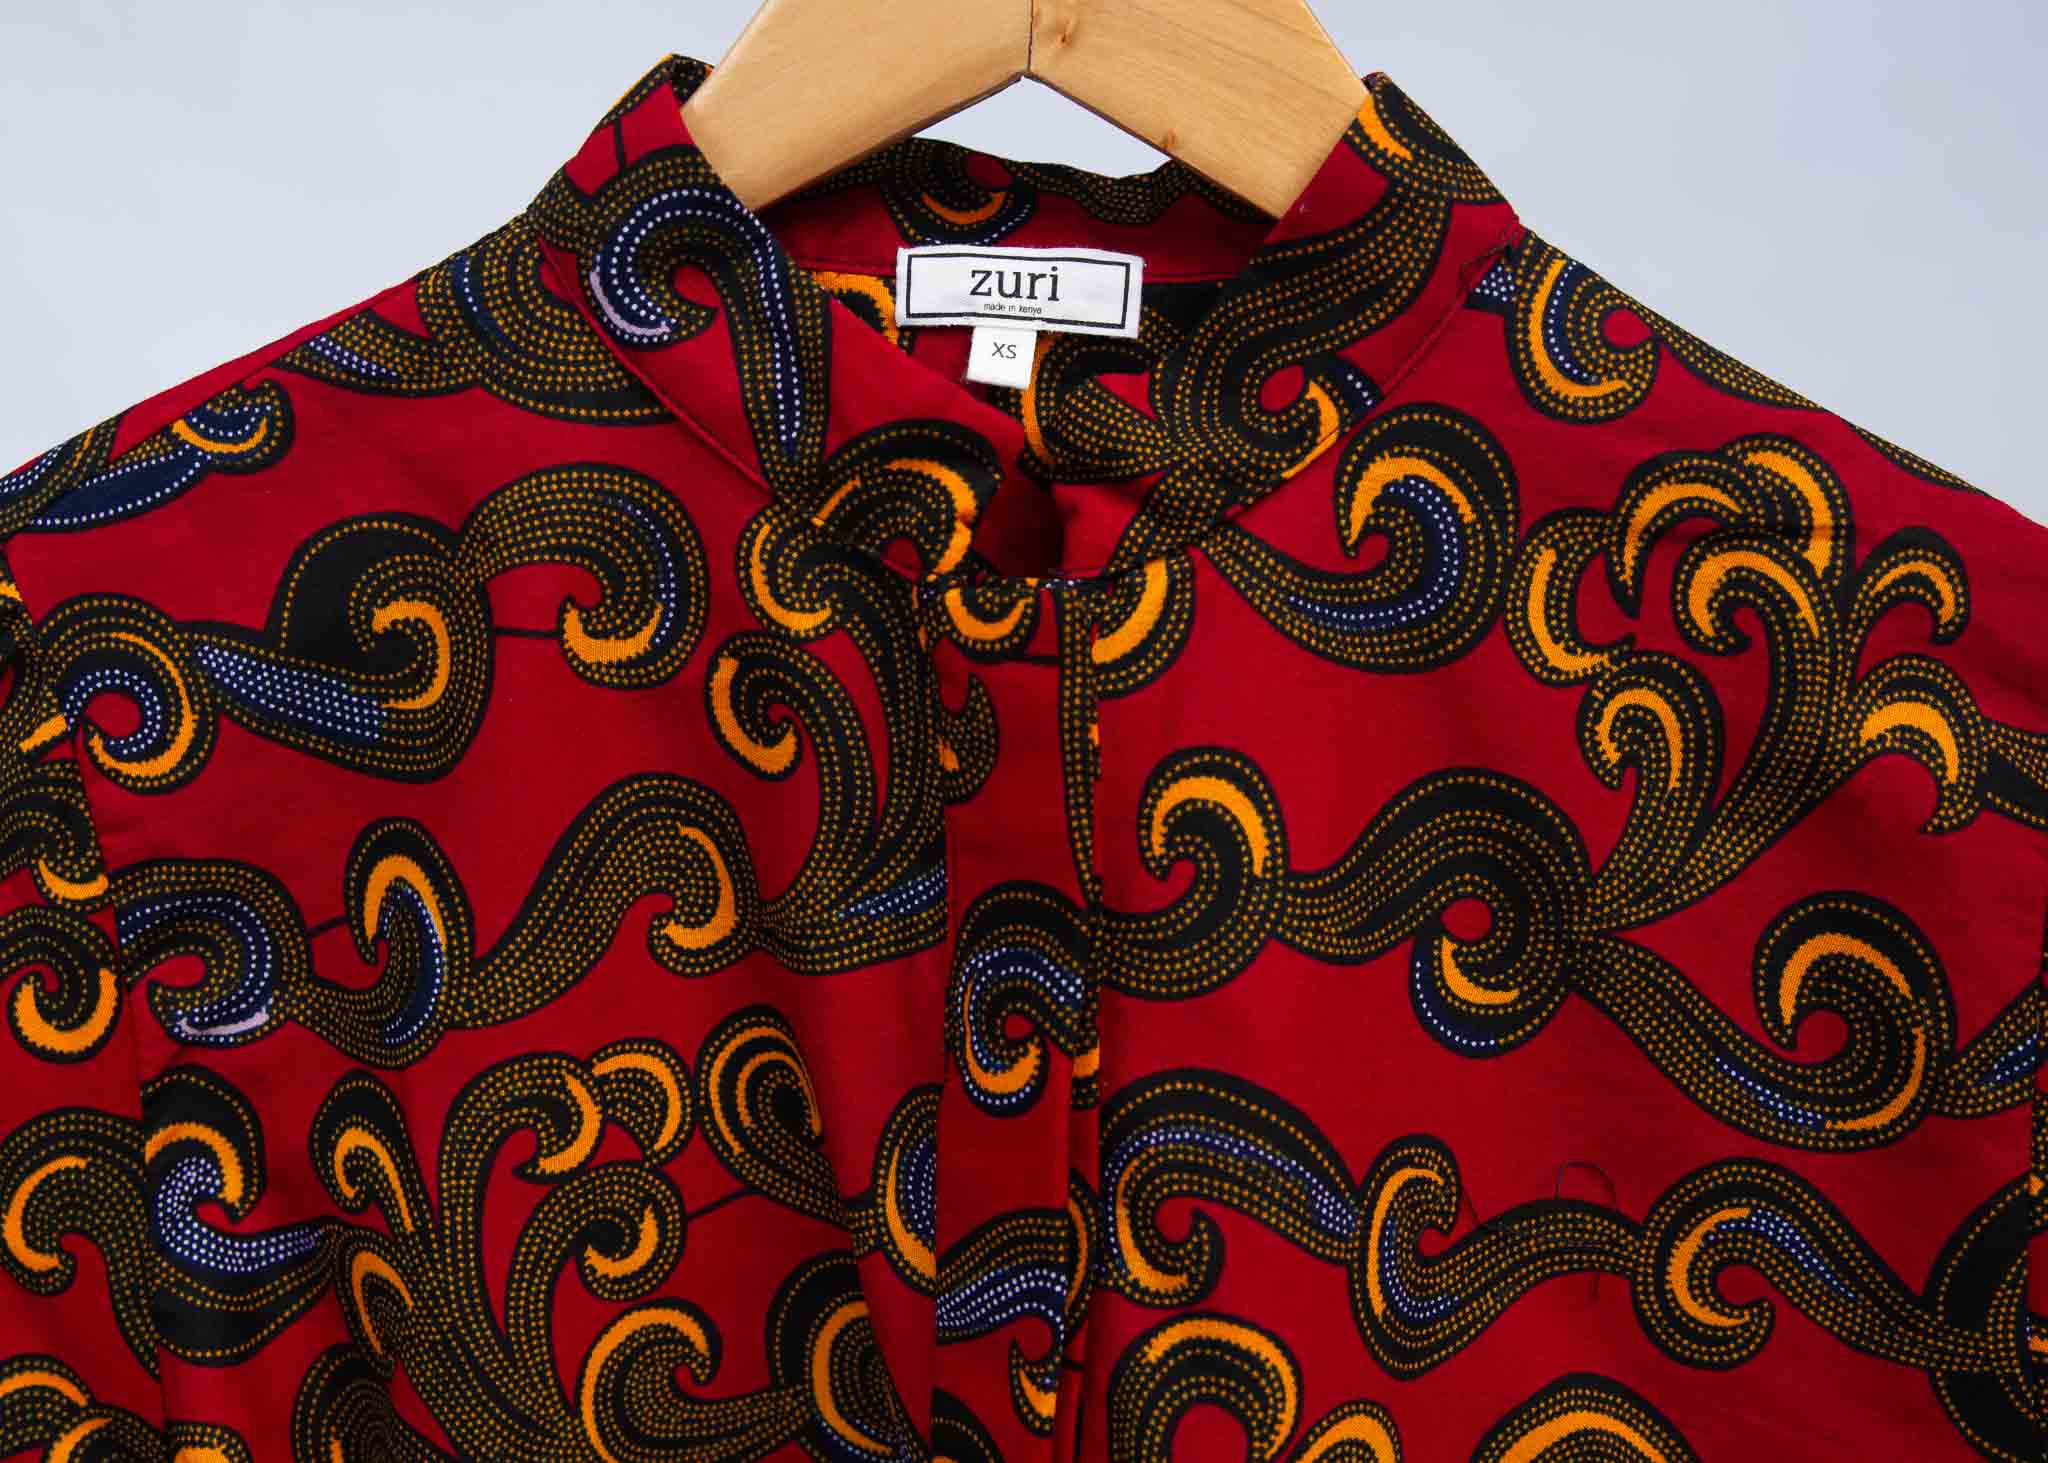 Display of red long sleeved blouse with yellow swirls.